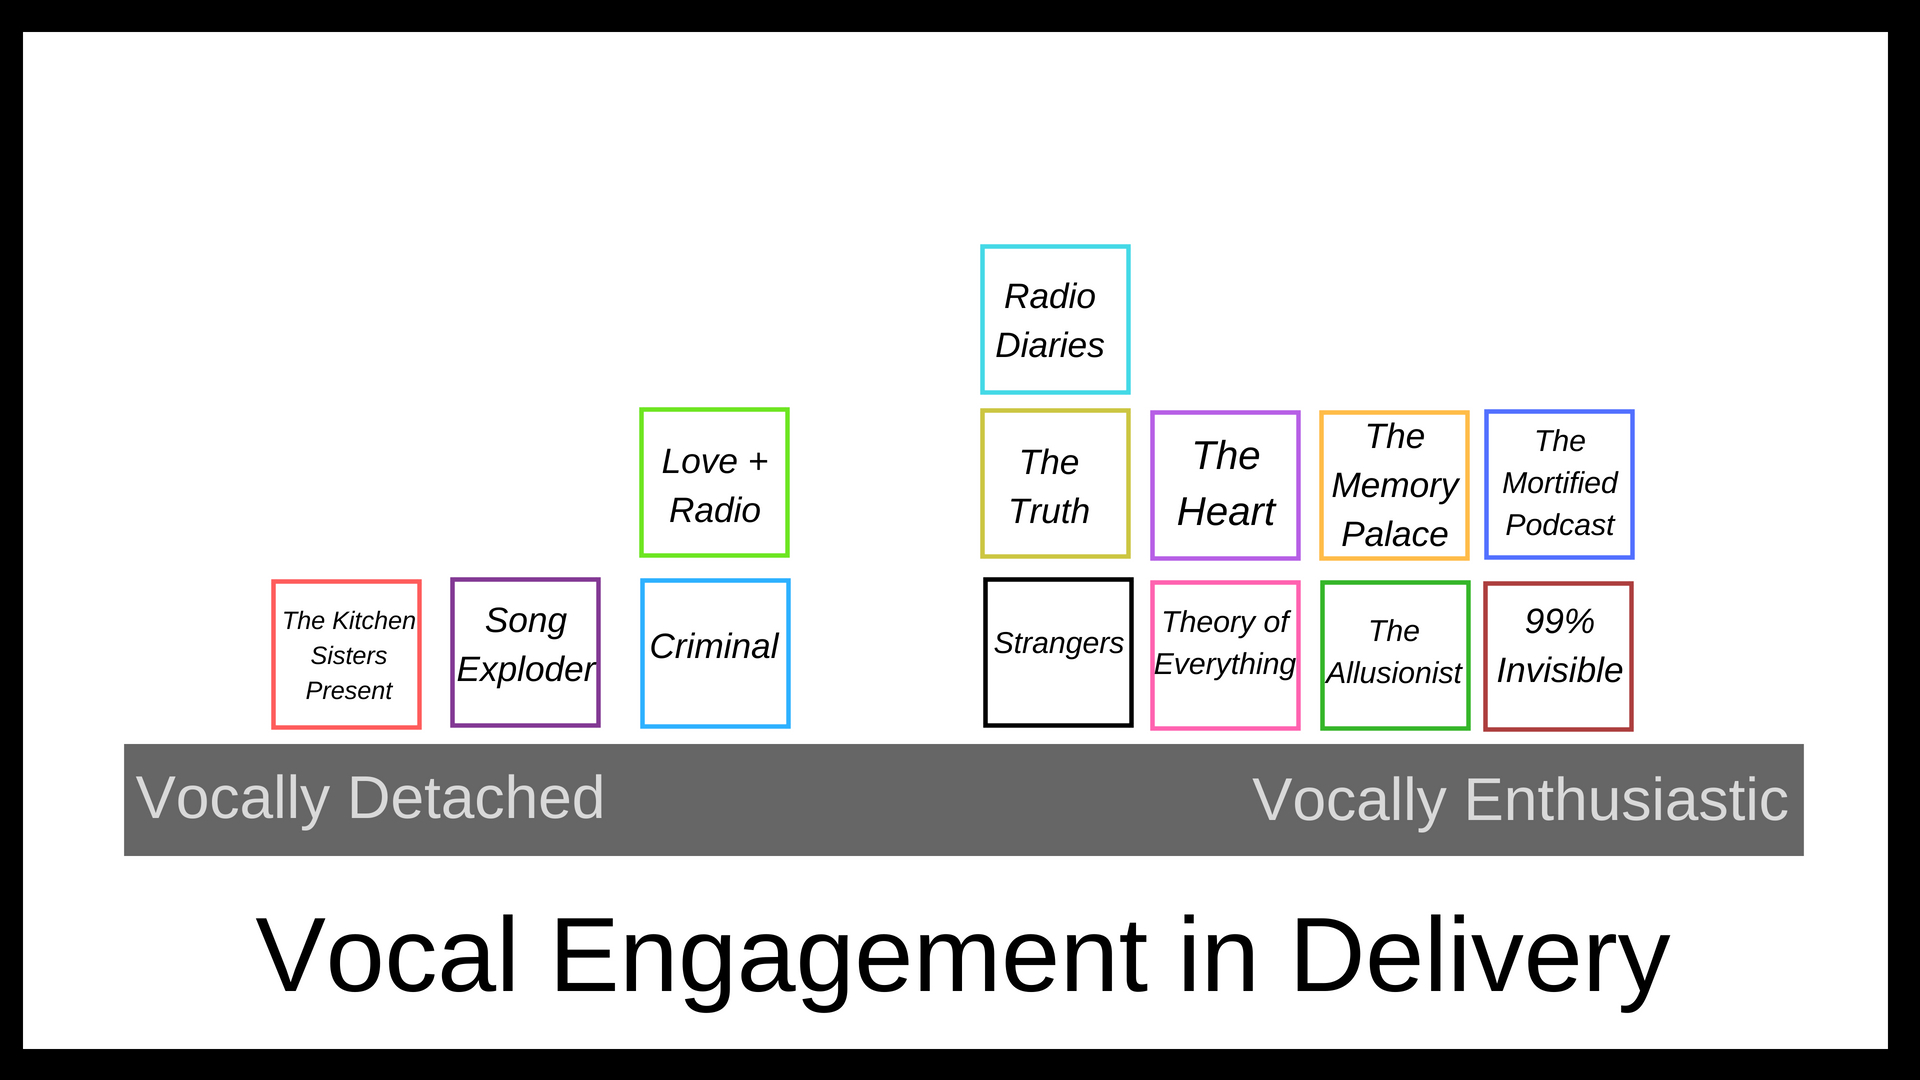 Chart titled Vocal Engagement in Delivery. Vocally Detached is on the left; Vocally Enthusiastic is on the right. Text includes the names of the podcasts in order from detached to enthusiastic.